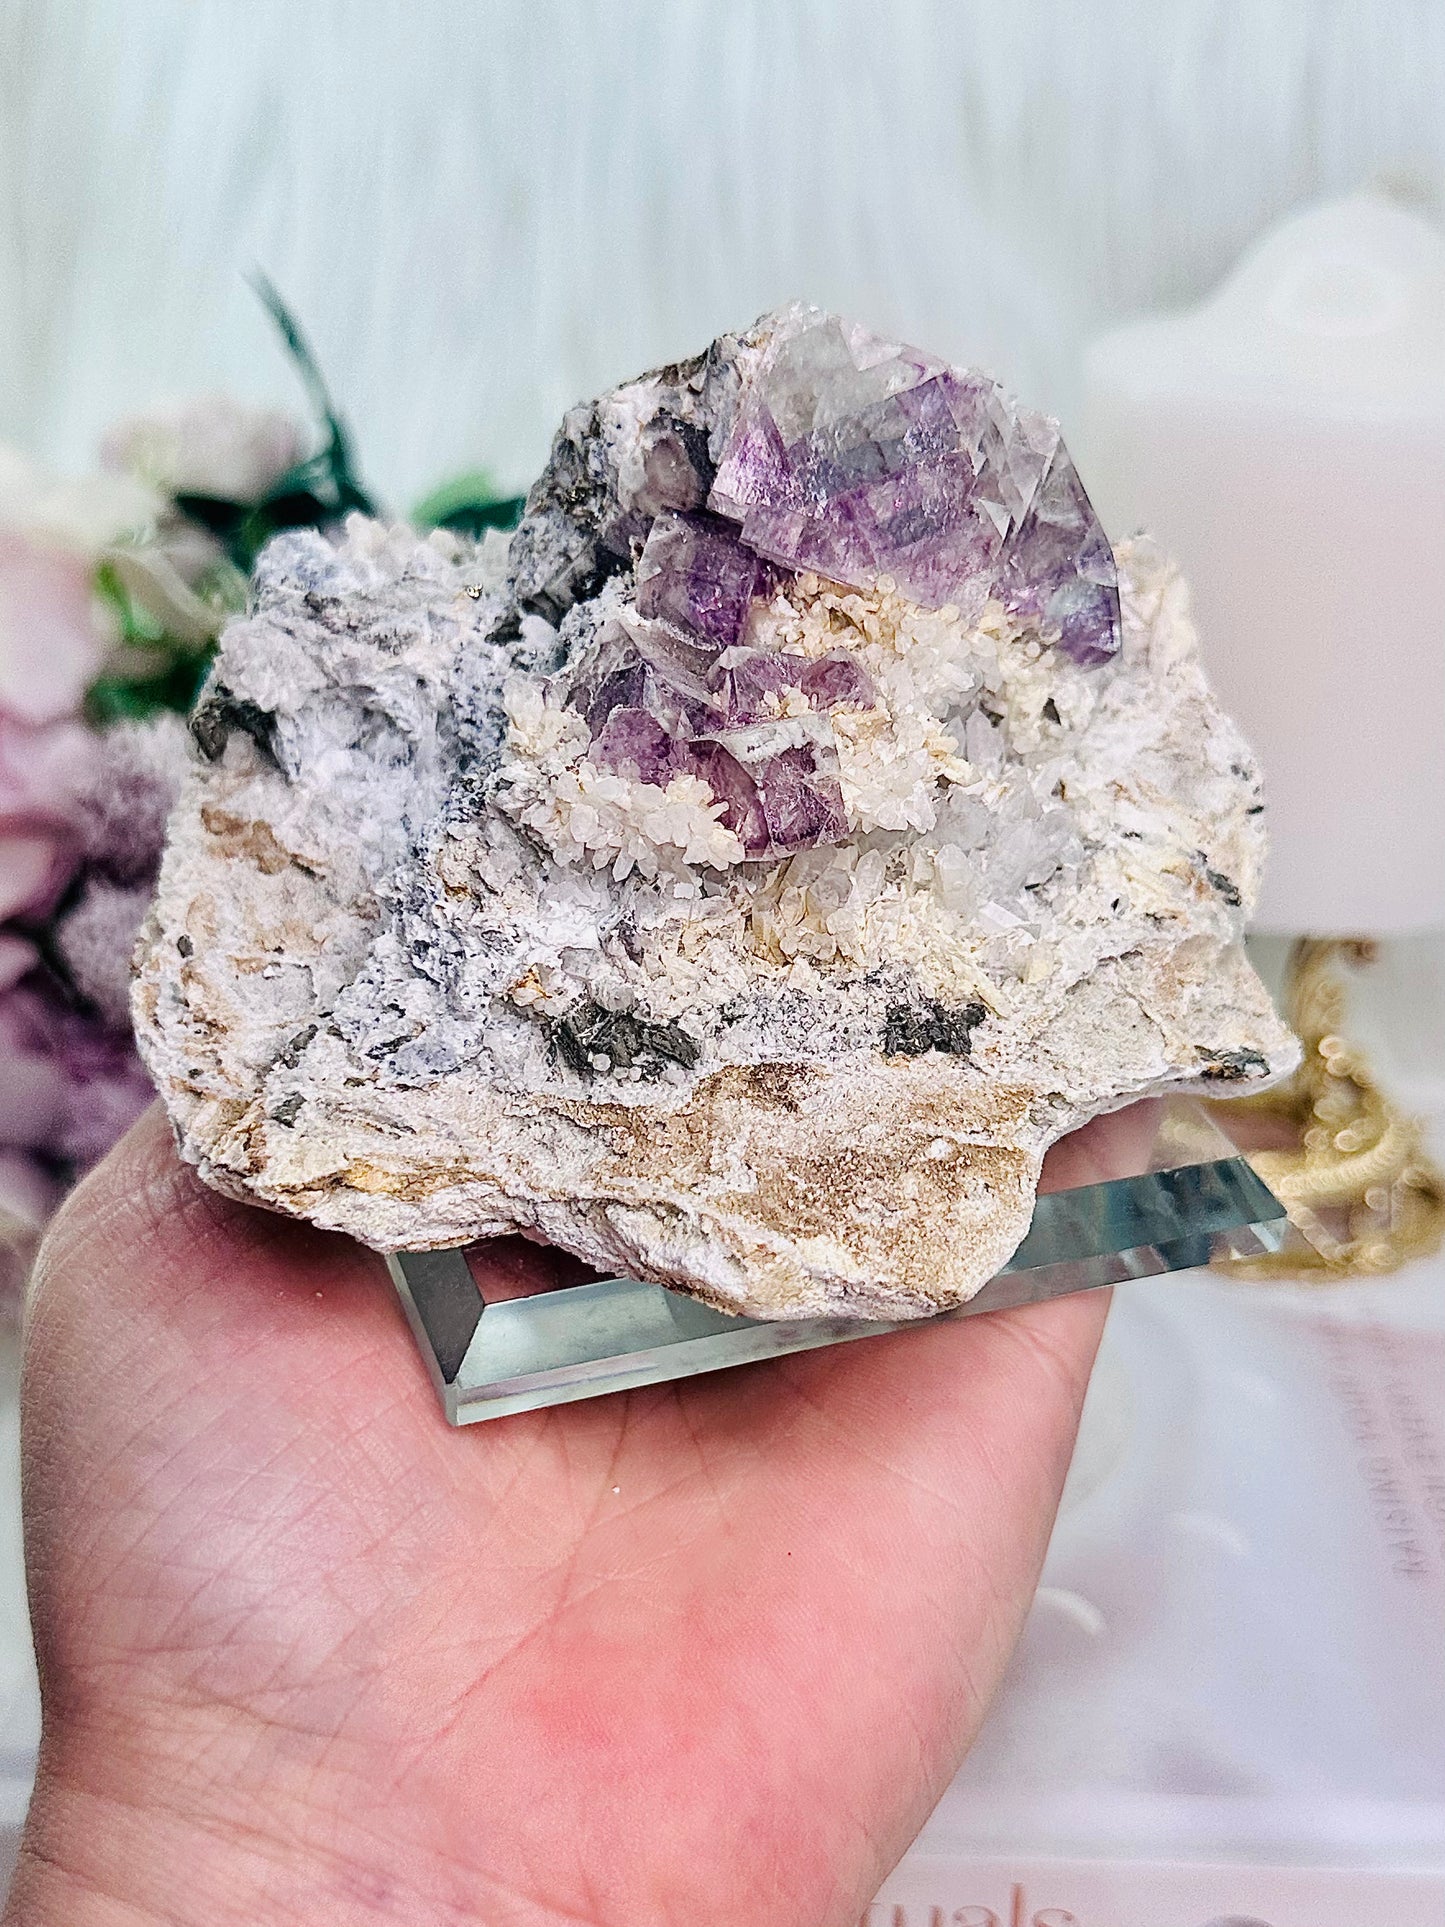 ✨ A Collectors Piece ✨ Classy & Fabulous Natural Cubed Fluorite On Matrix Specimen From Mexico 703grams ~ Specimen is on Glass Stand